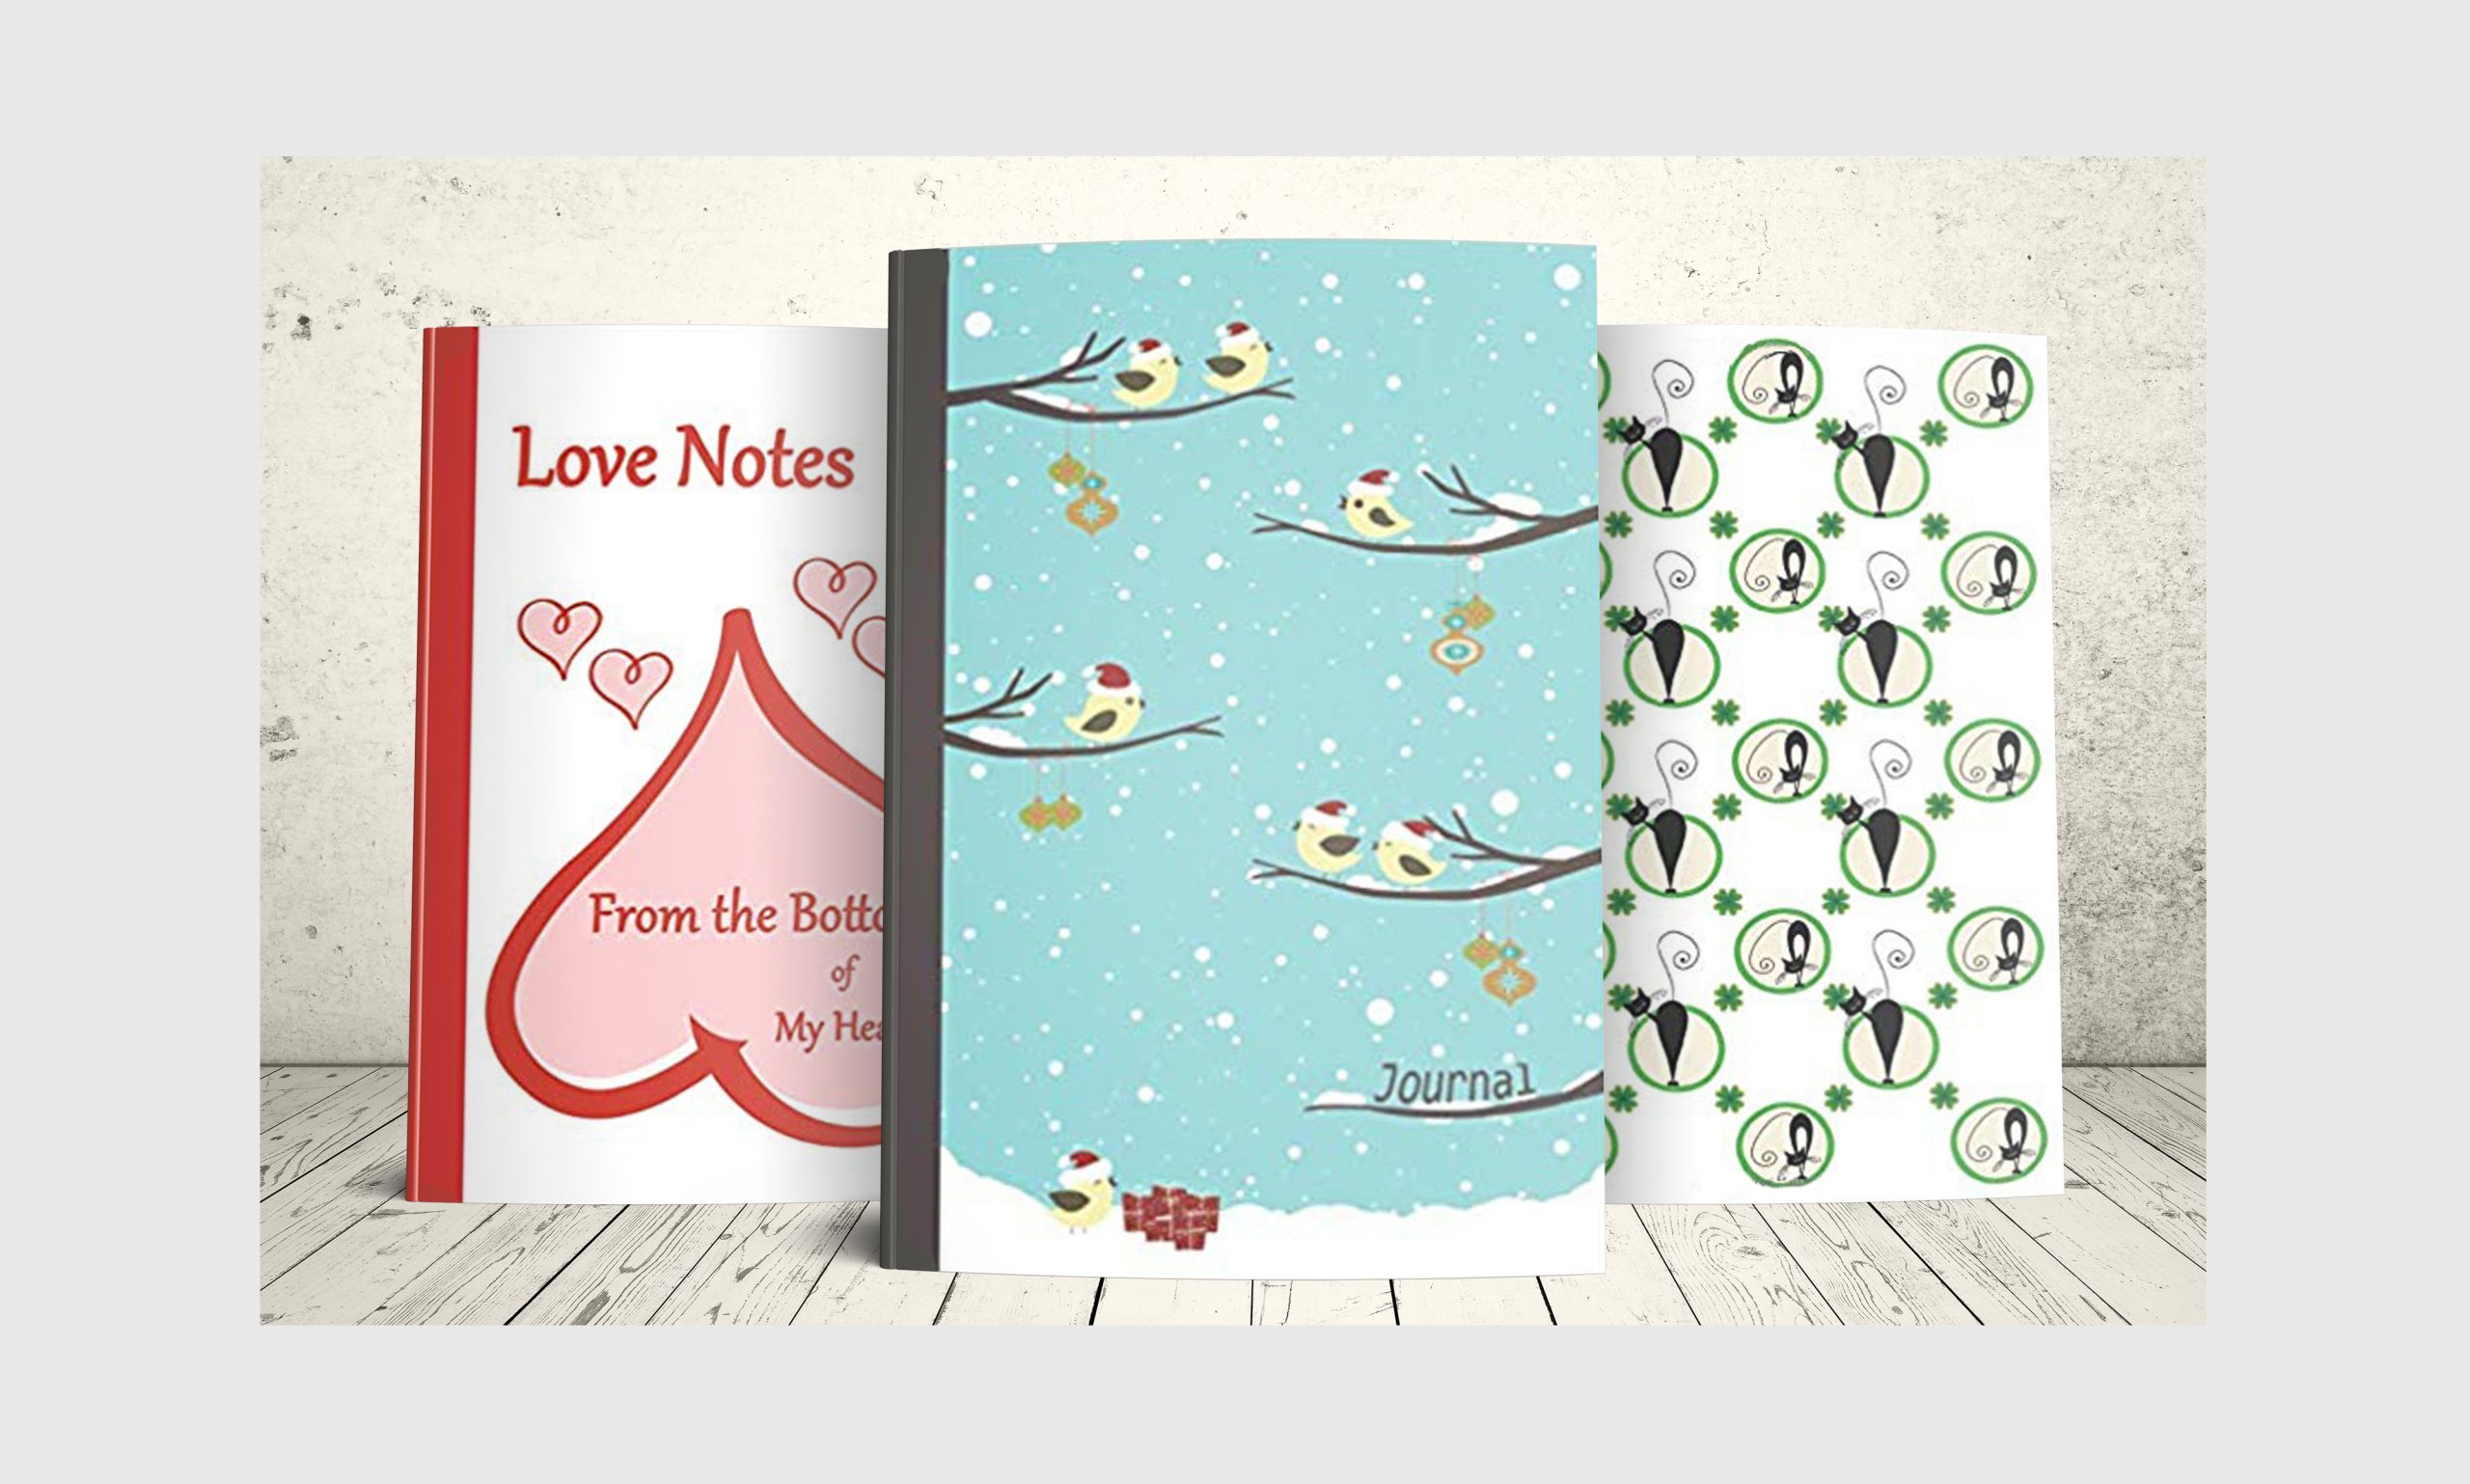 Three holiday journals, Love notes for Valentine's Day, Christmas Birds and Black Cats with Shamrocks for St. Patrick's Day.